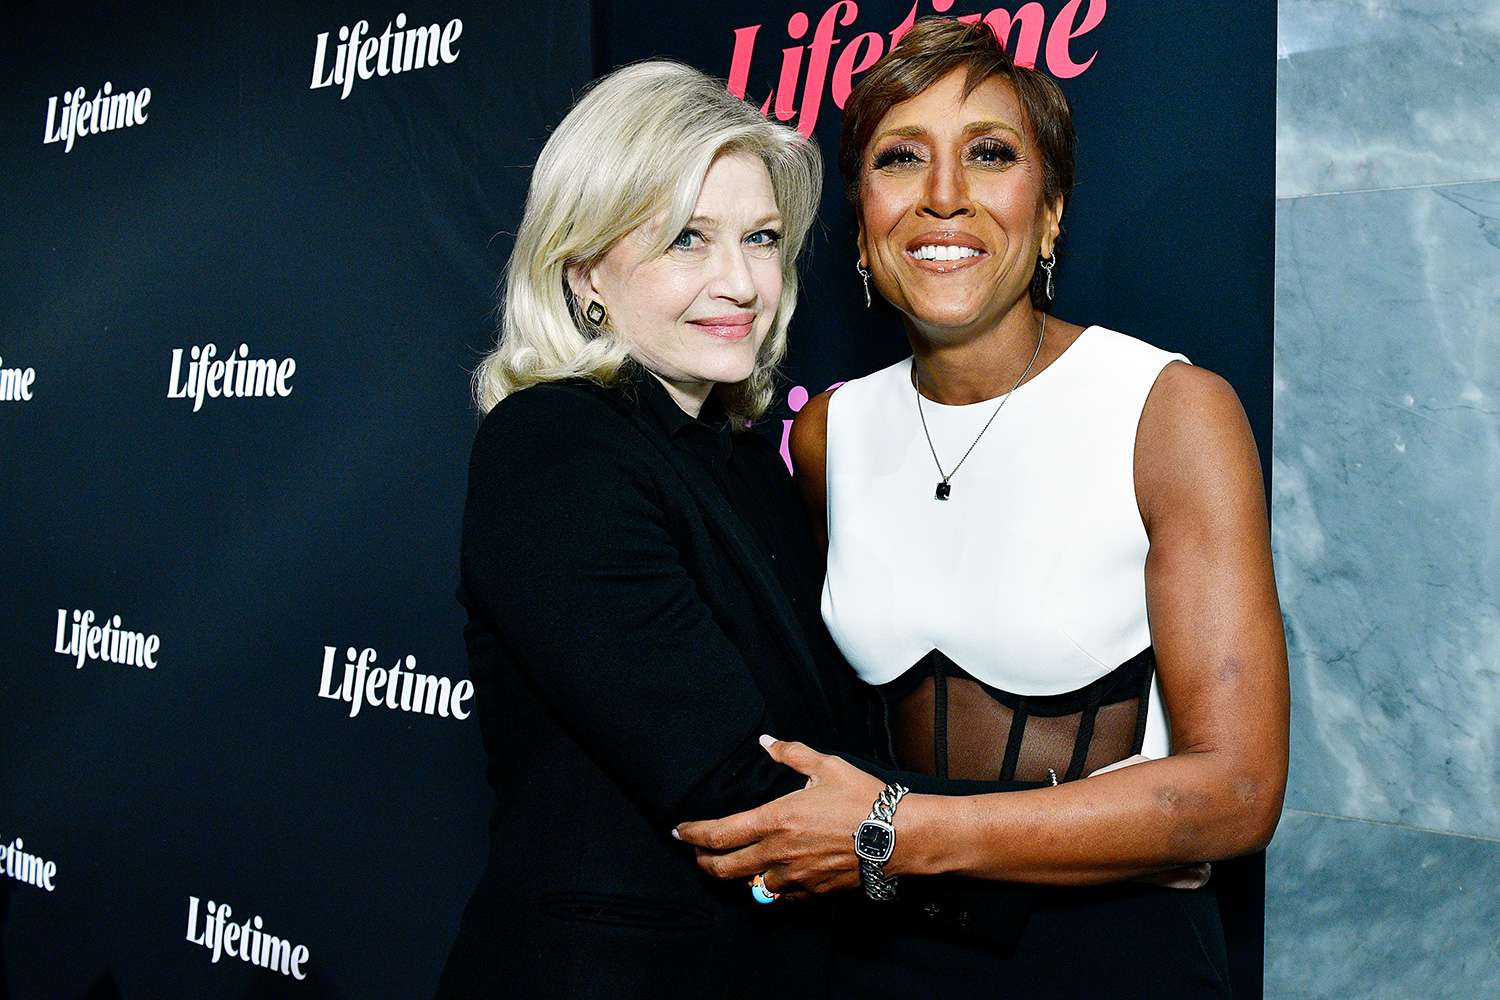 Diane Sawyer and Robin Roberts attend the Lifetime special screening: Robin Roberts Presents "Stolen By My Mother, The Kamiyah Mobley Story"on January 13, 2020 in New York City